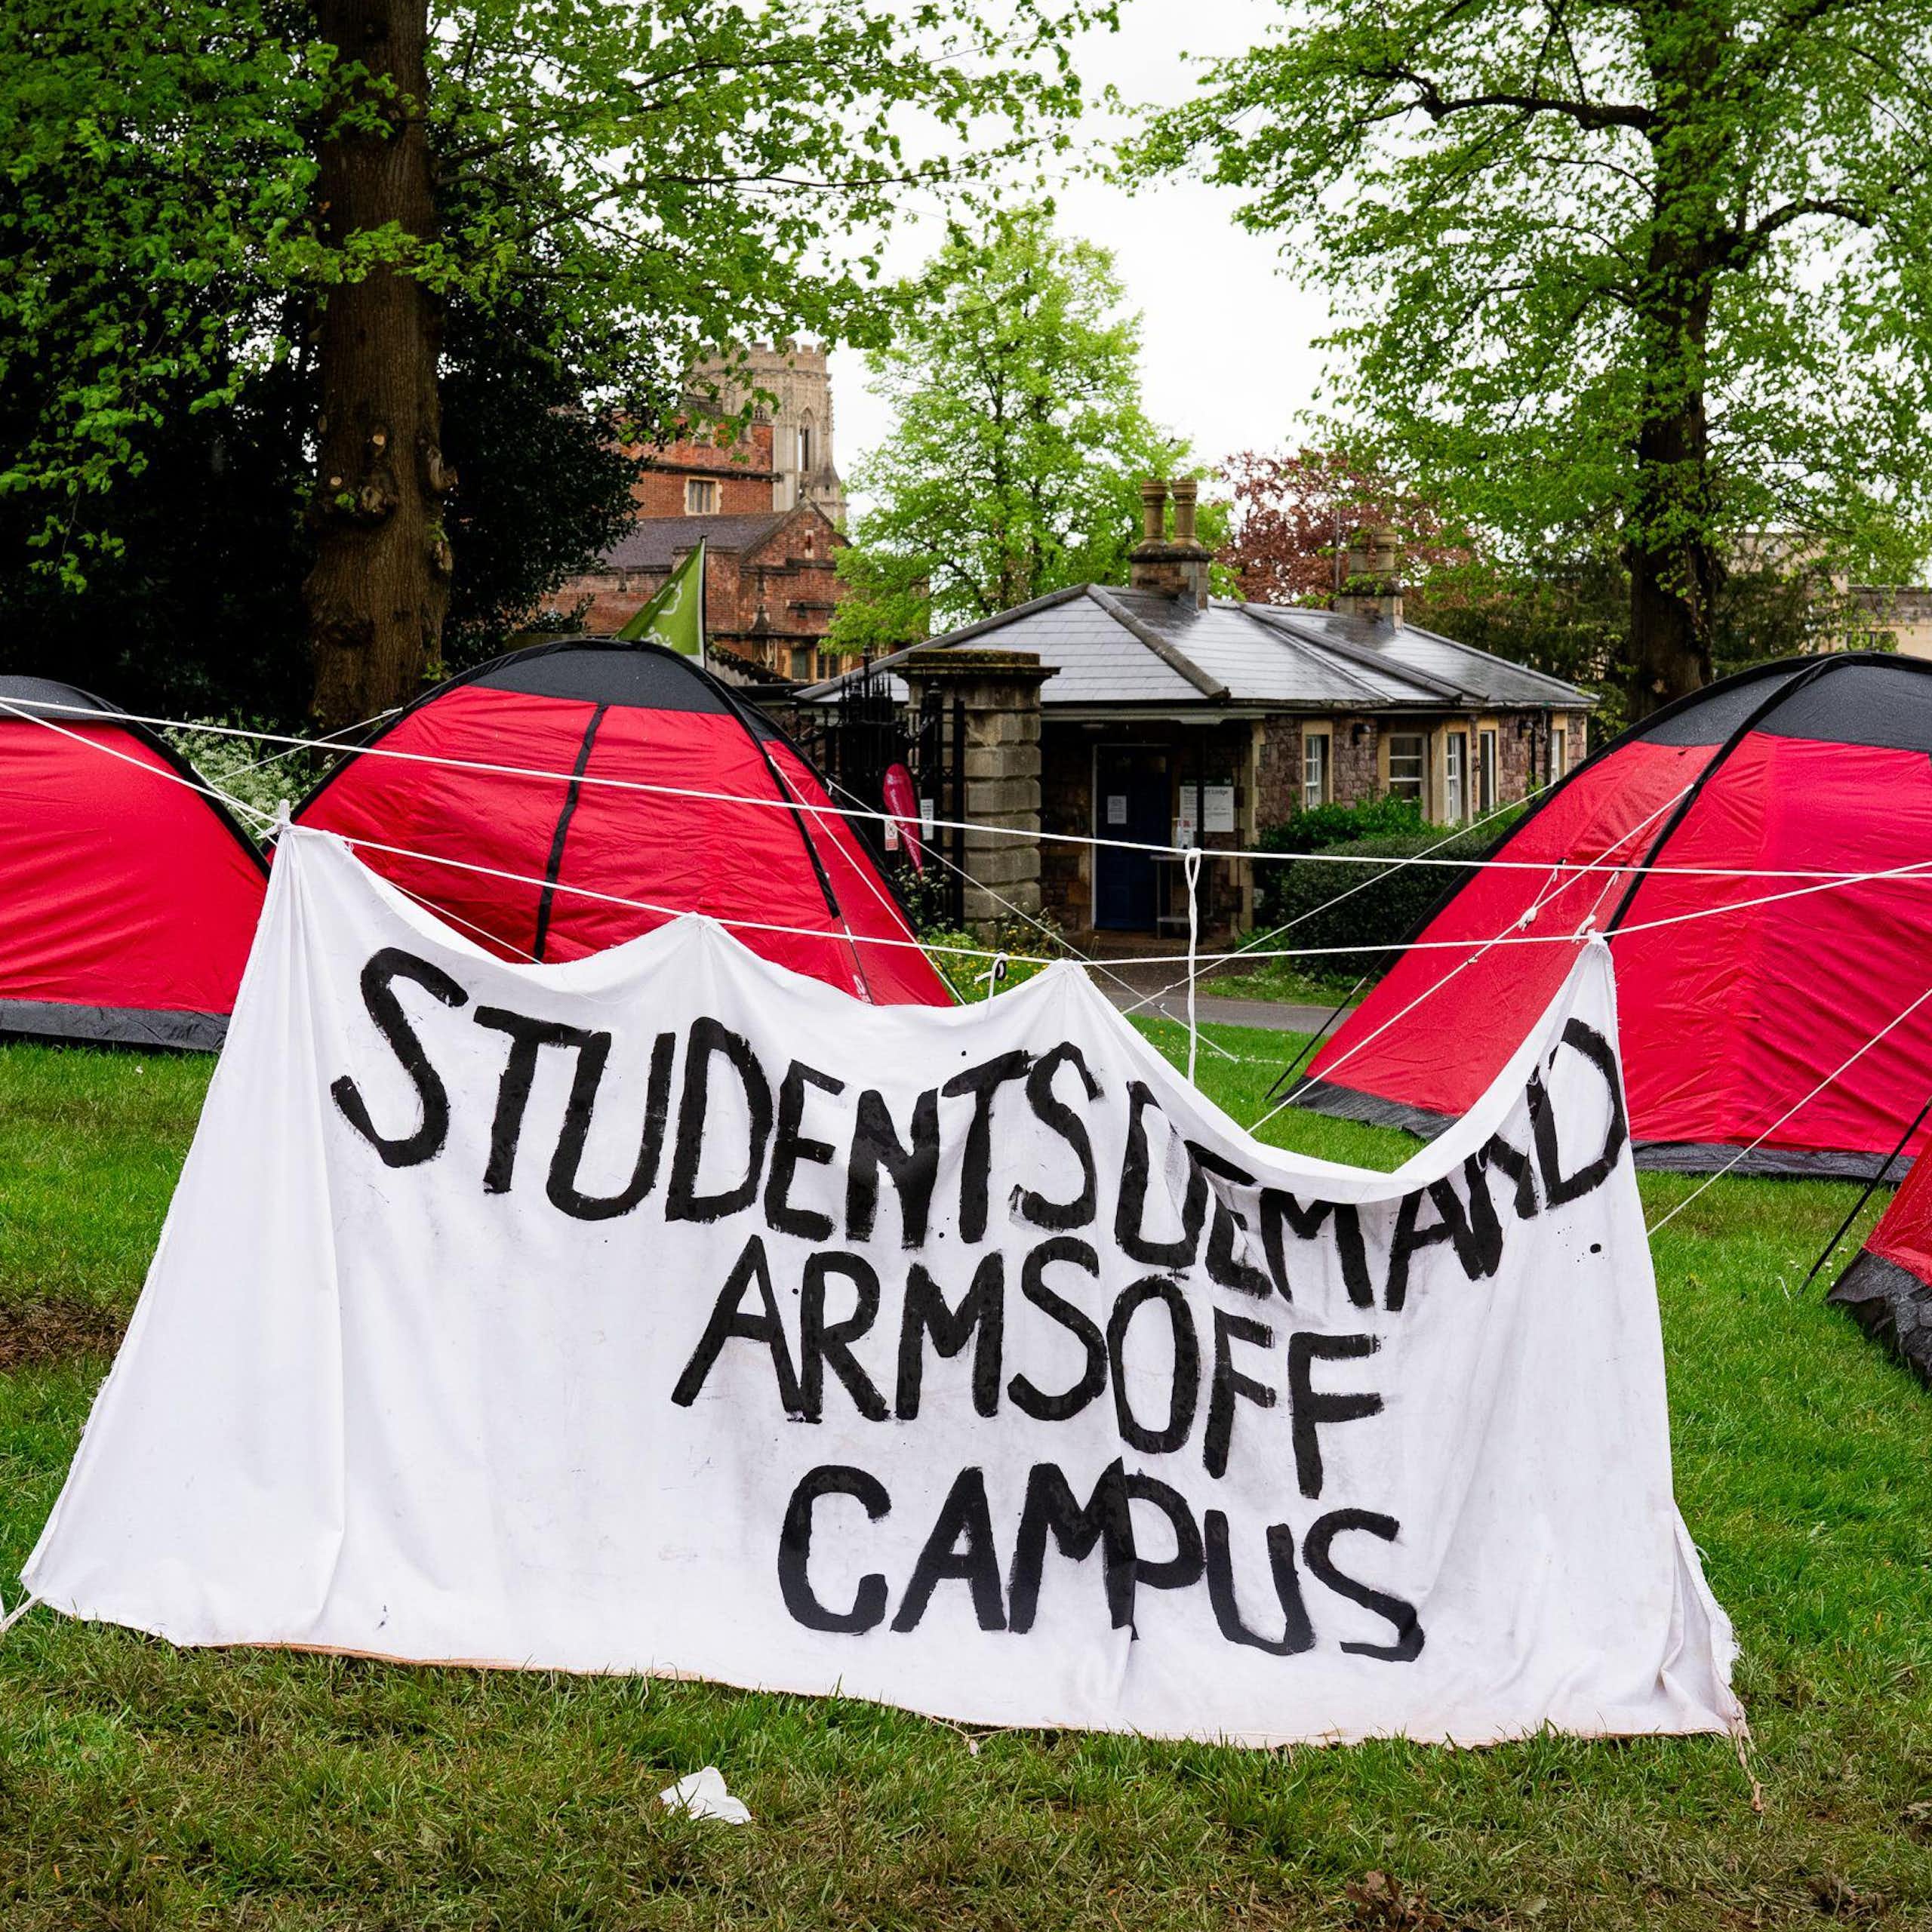 Red camping tents on a green lawn, with a large hand painted sign reading 'students demand arms off campus'